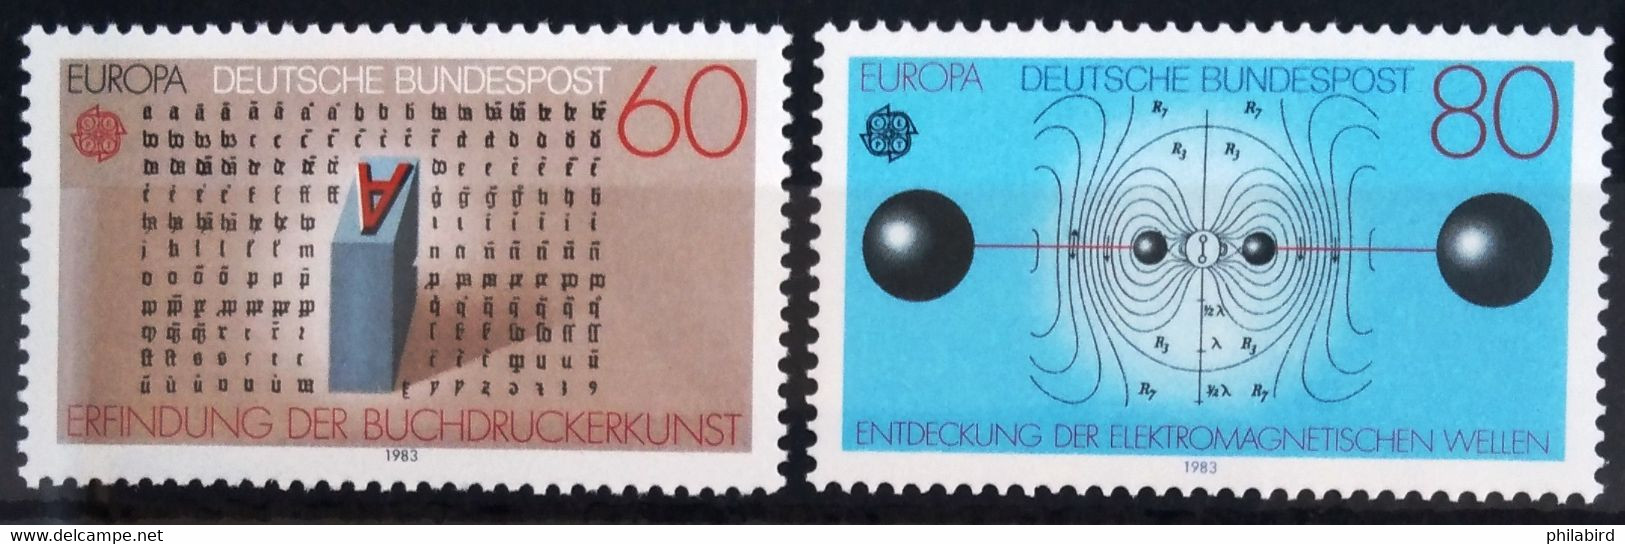 EUROPA 1983 - ALLEMAGNE                 N° 1007/1008                       NEUF** - 1983